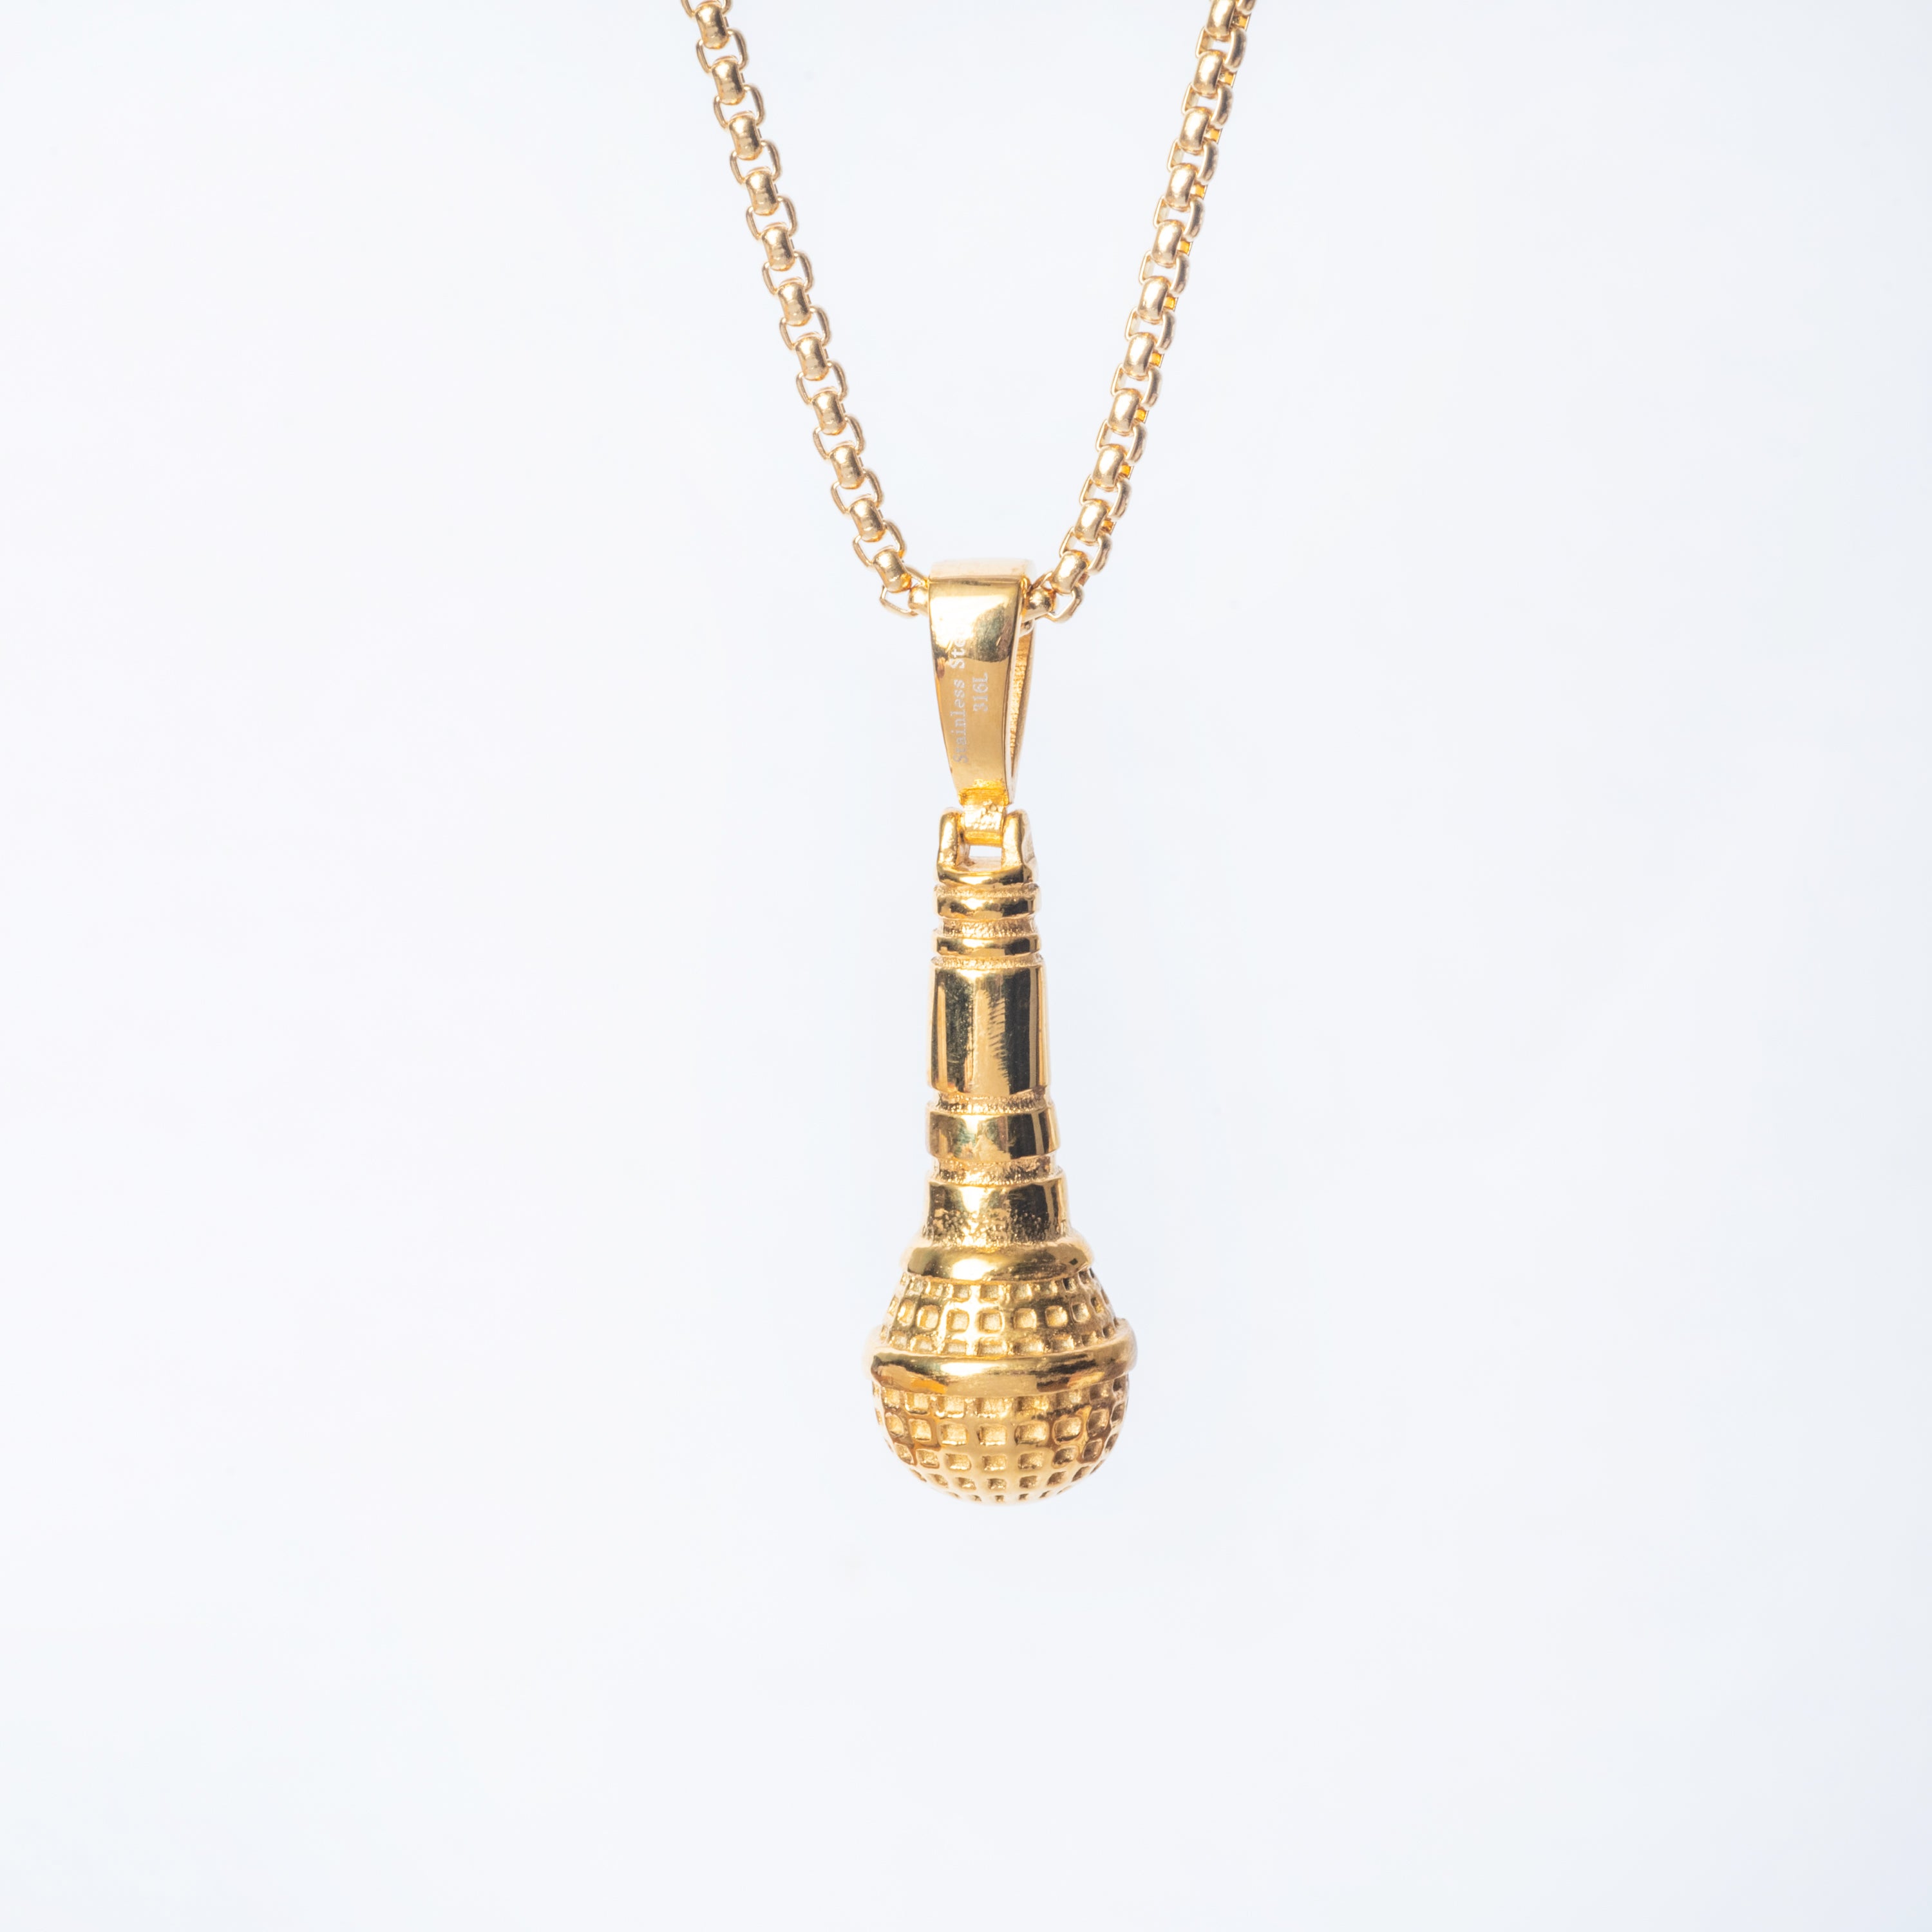 The Singer Necklace